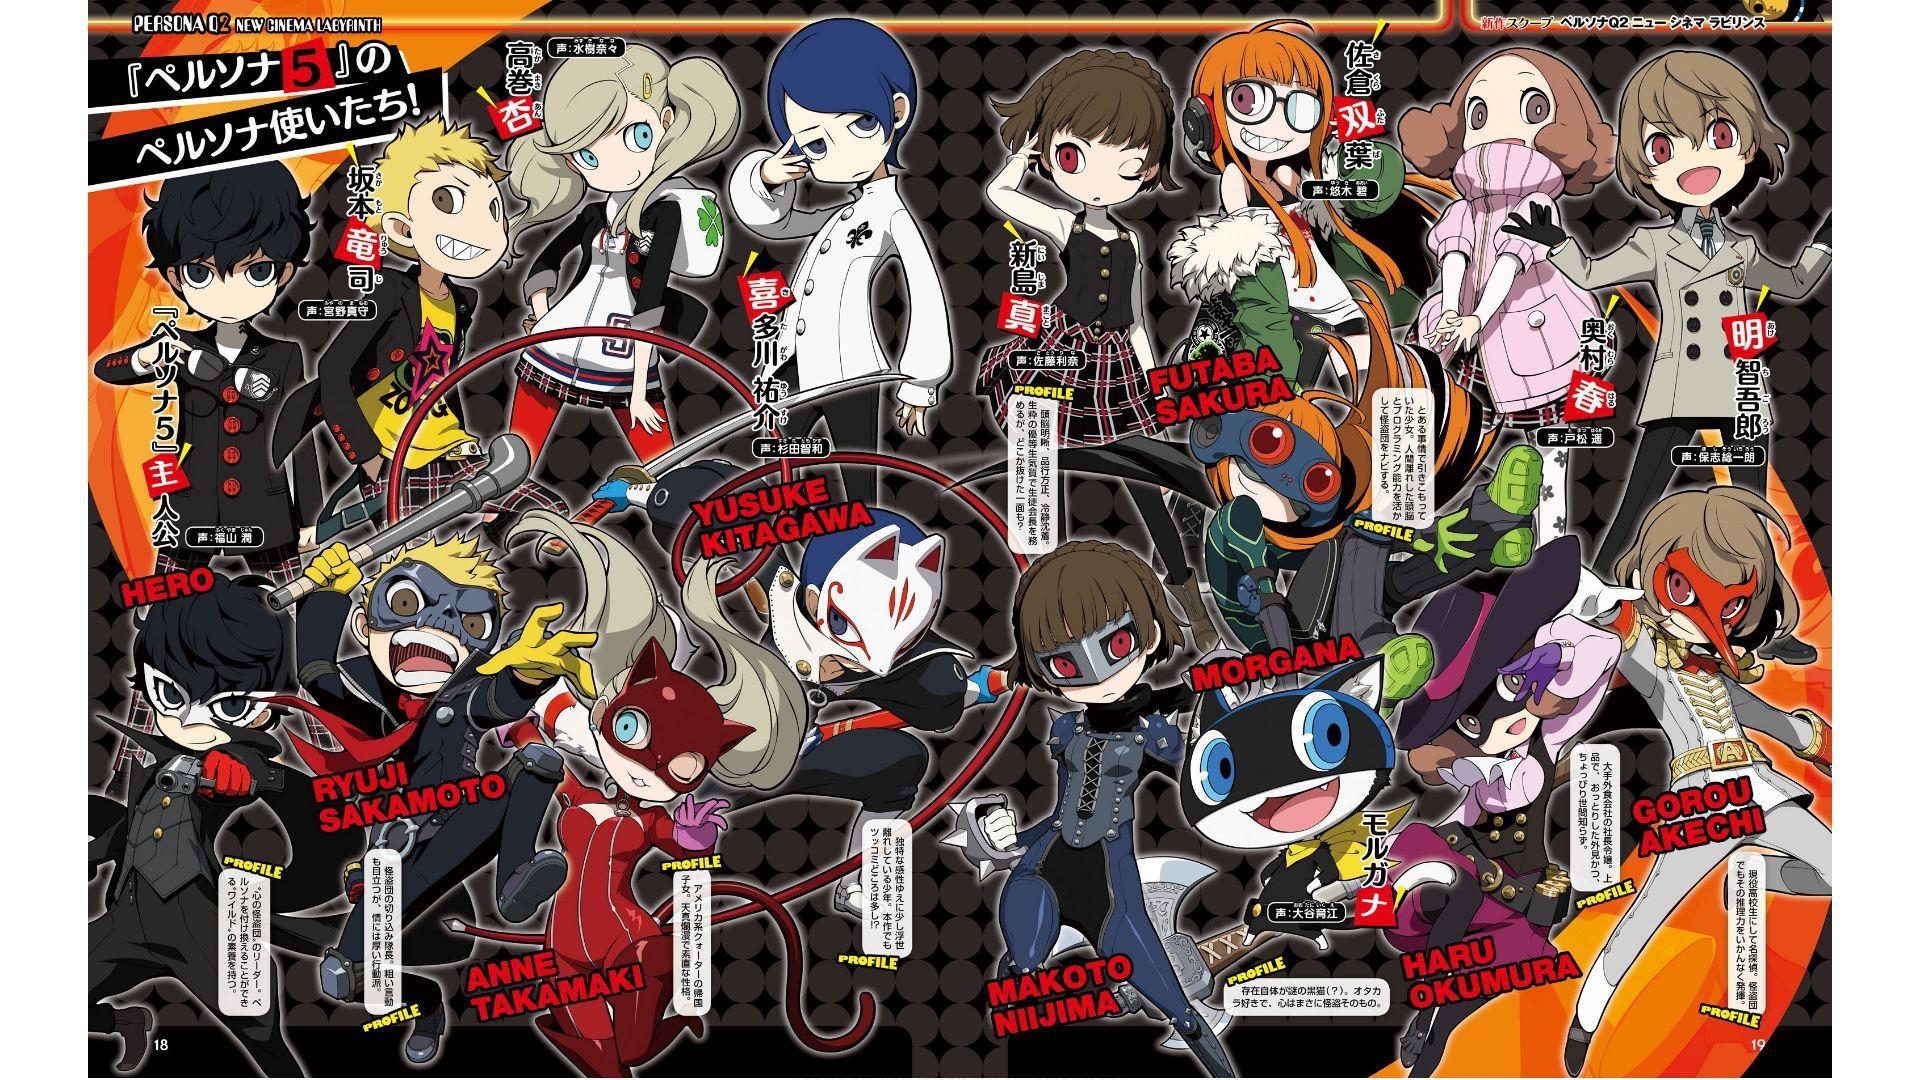 Persona Q2 Gets New Screenshots and Art Showing Giant Cast